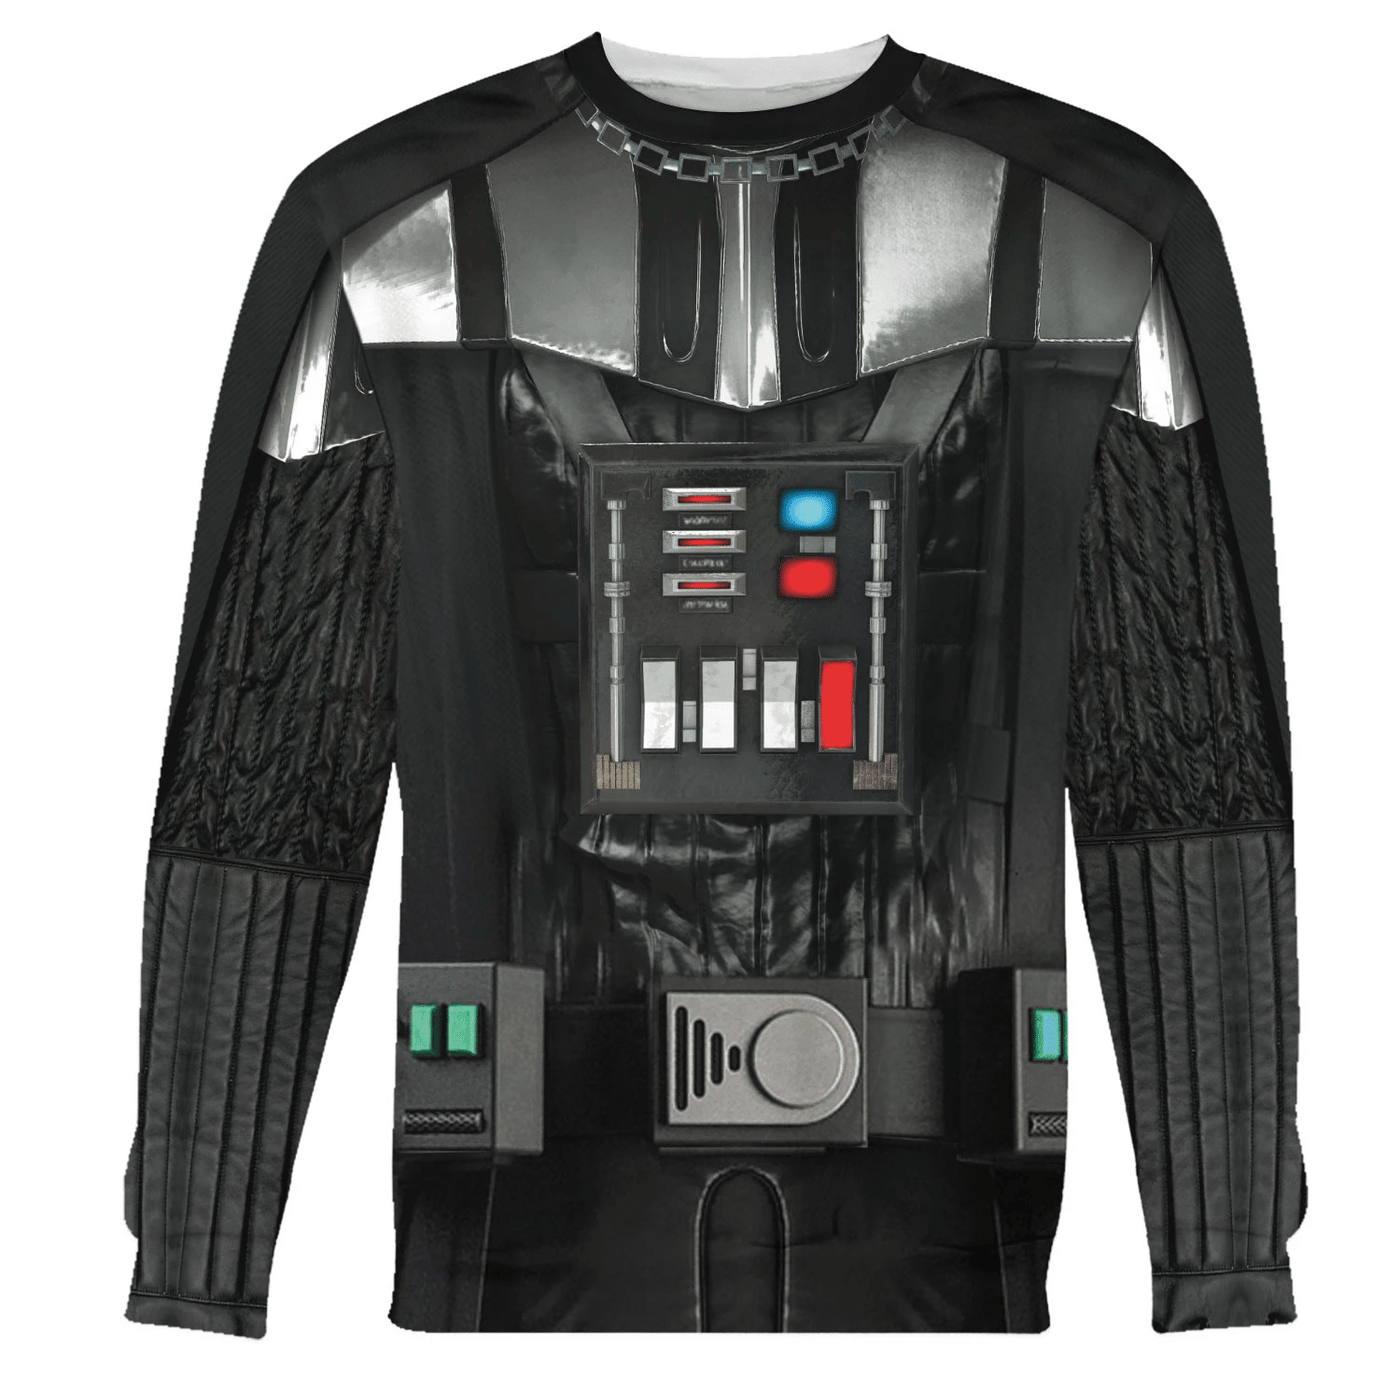 Star Wars Star Wars Darth Vader Costume - Sweater - Ugly Christmas Sweater